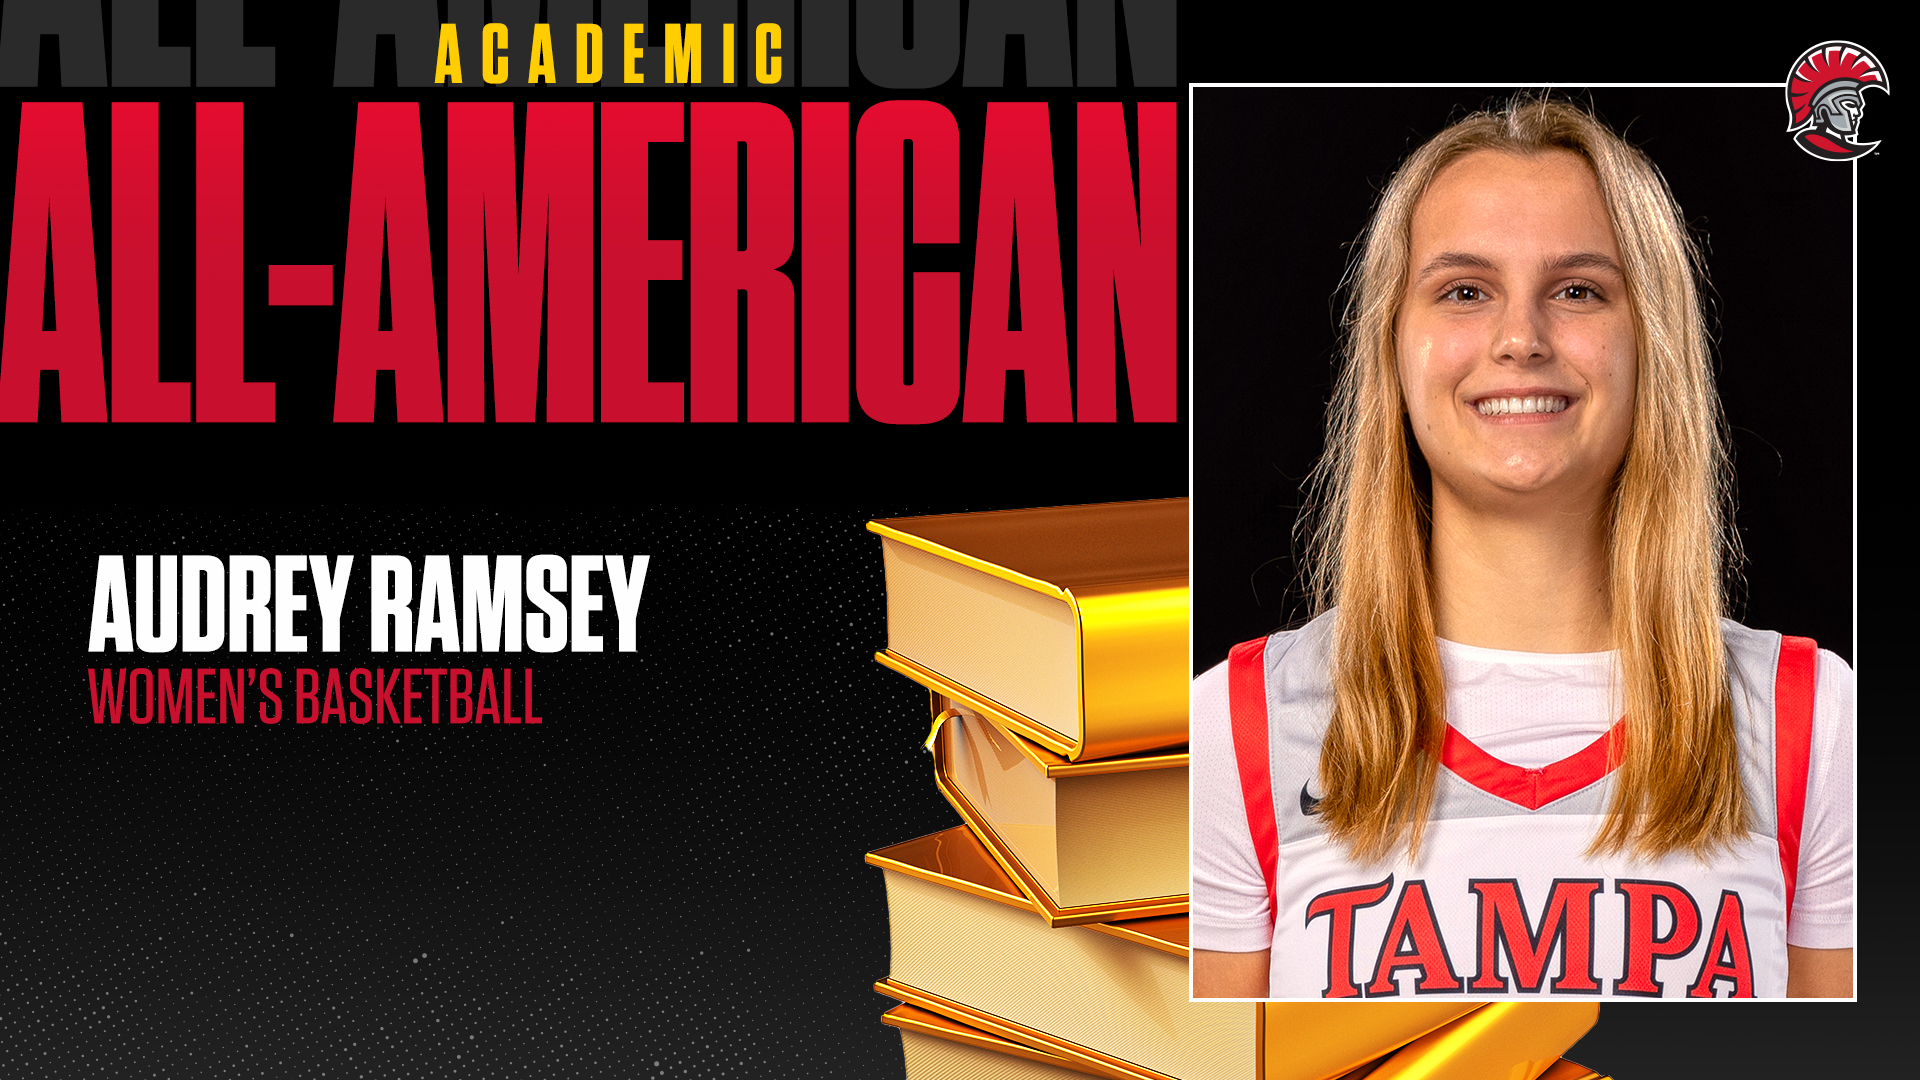 Audrey Ramsey Named Academic All-American